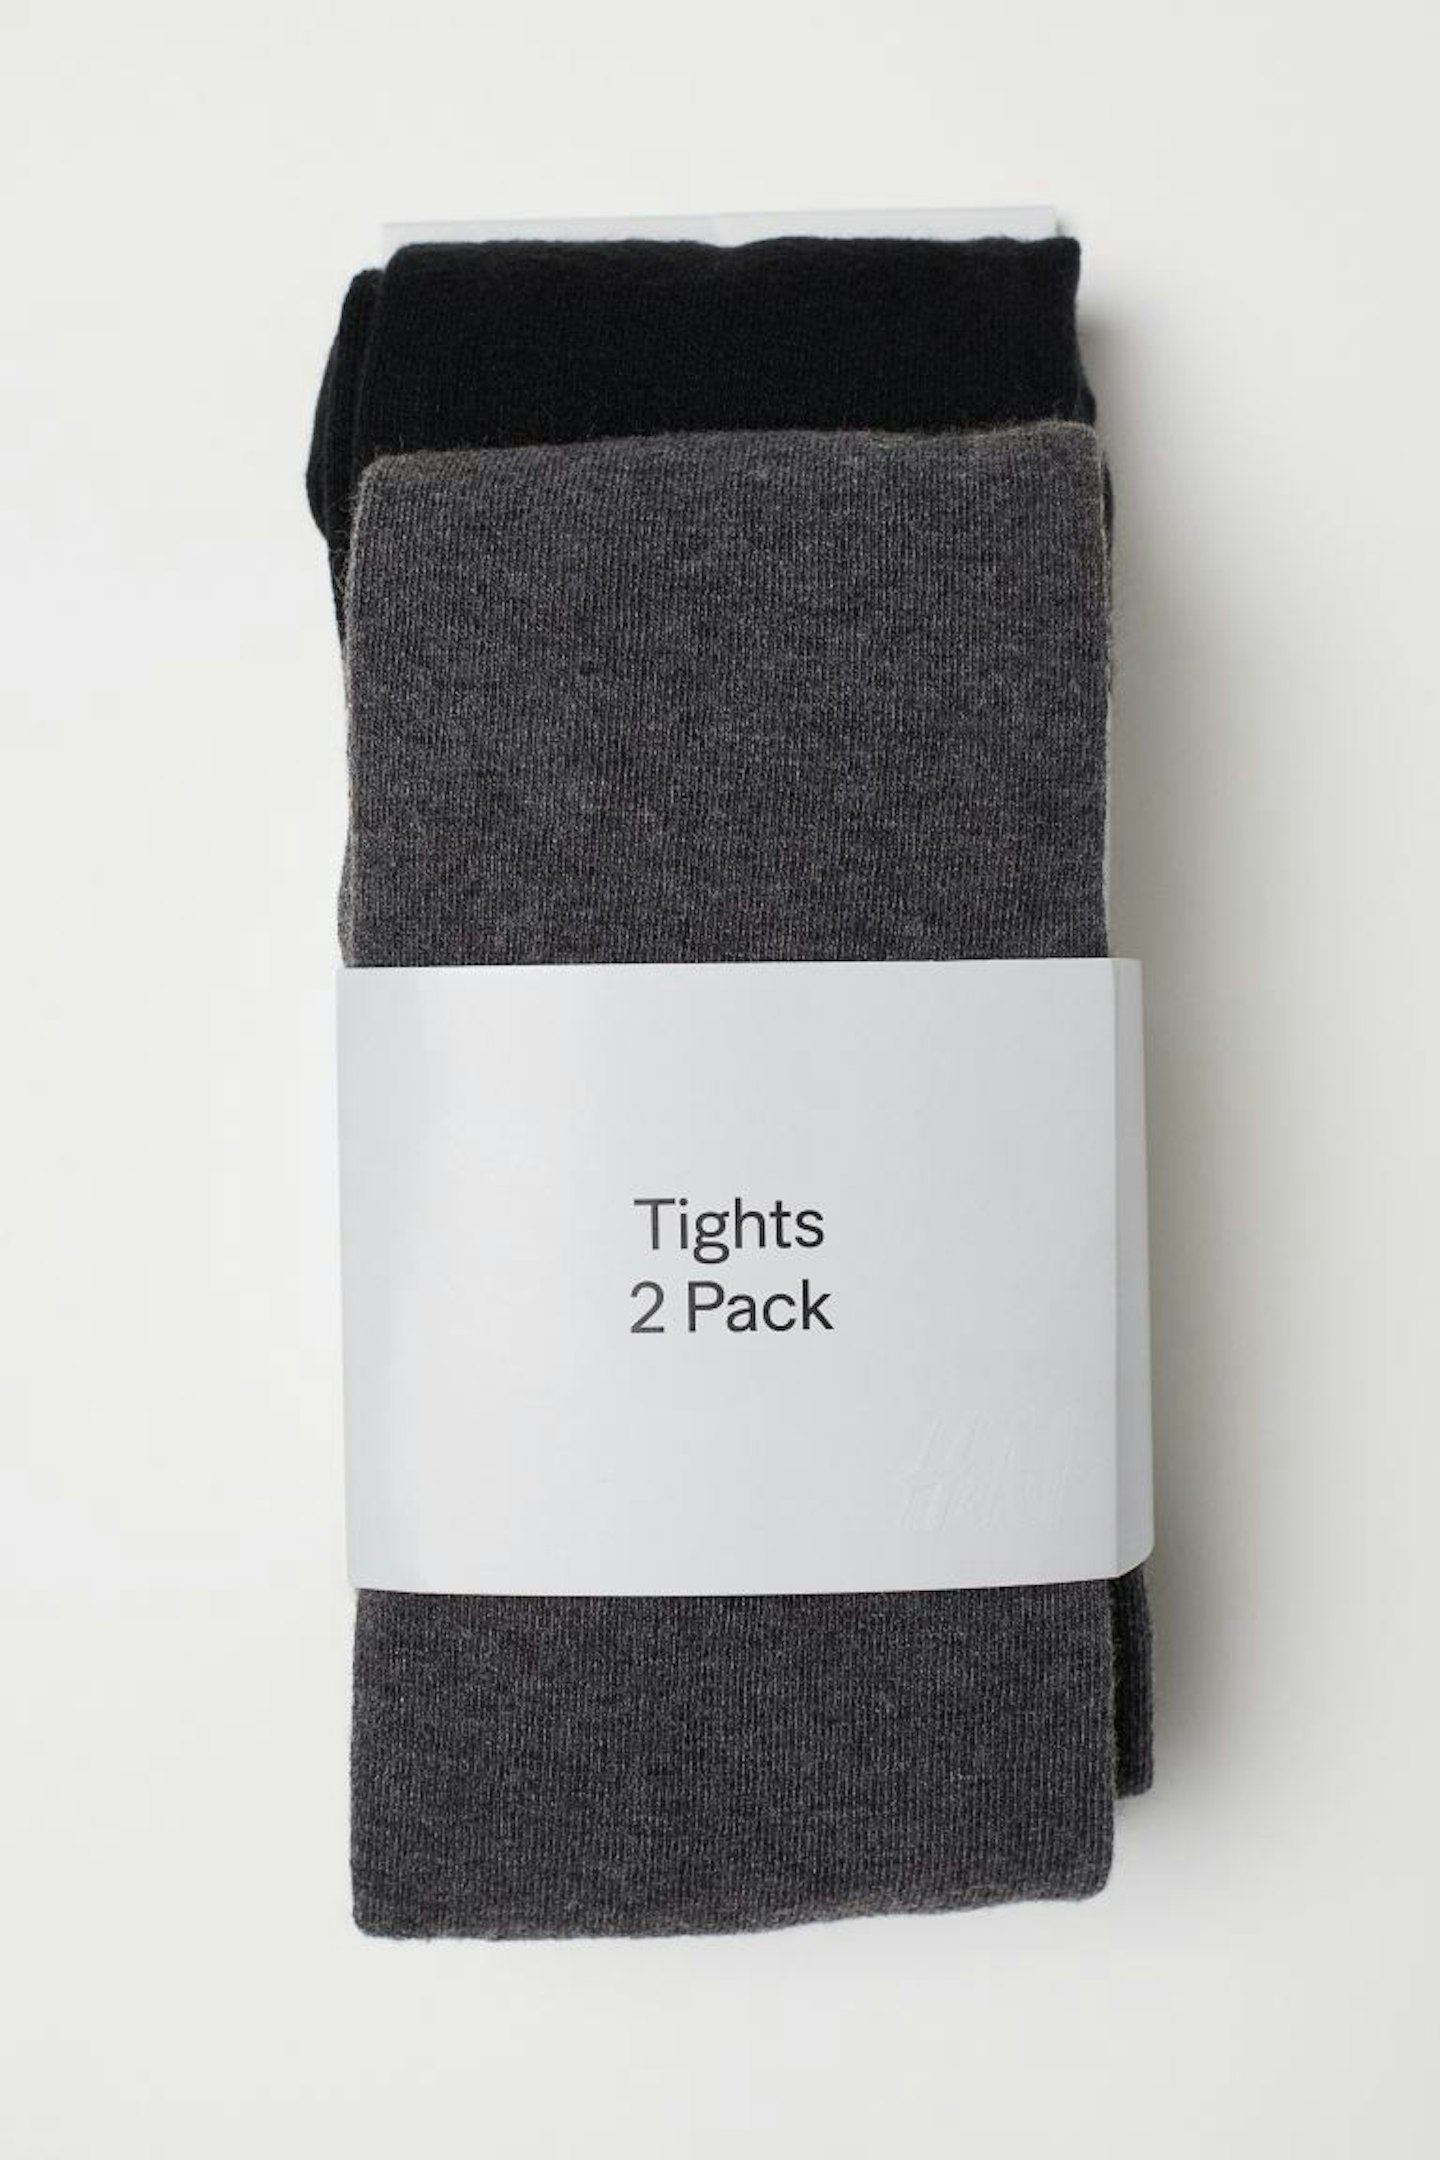 H&M, 2 Pack Fine Knit Tights, £12.99